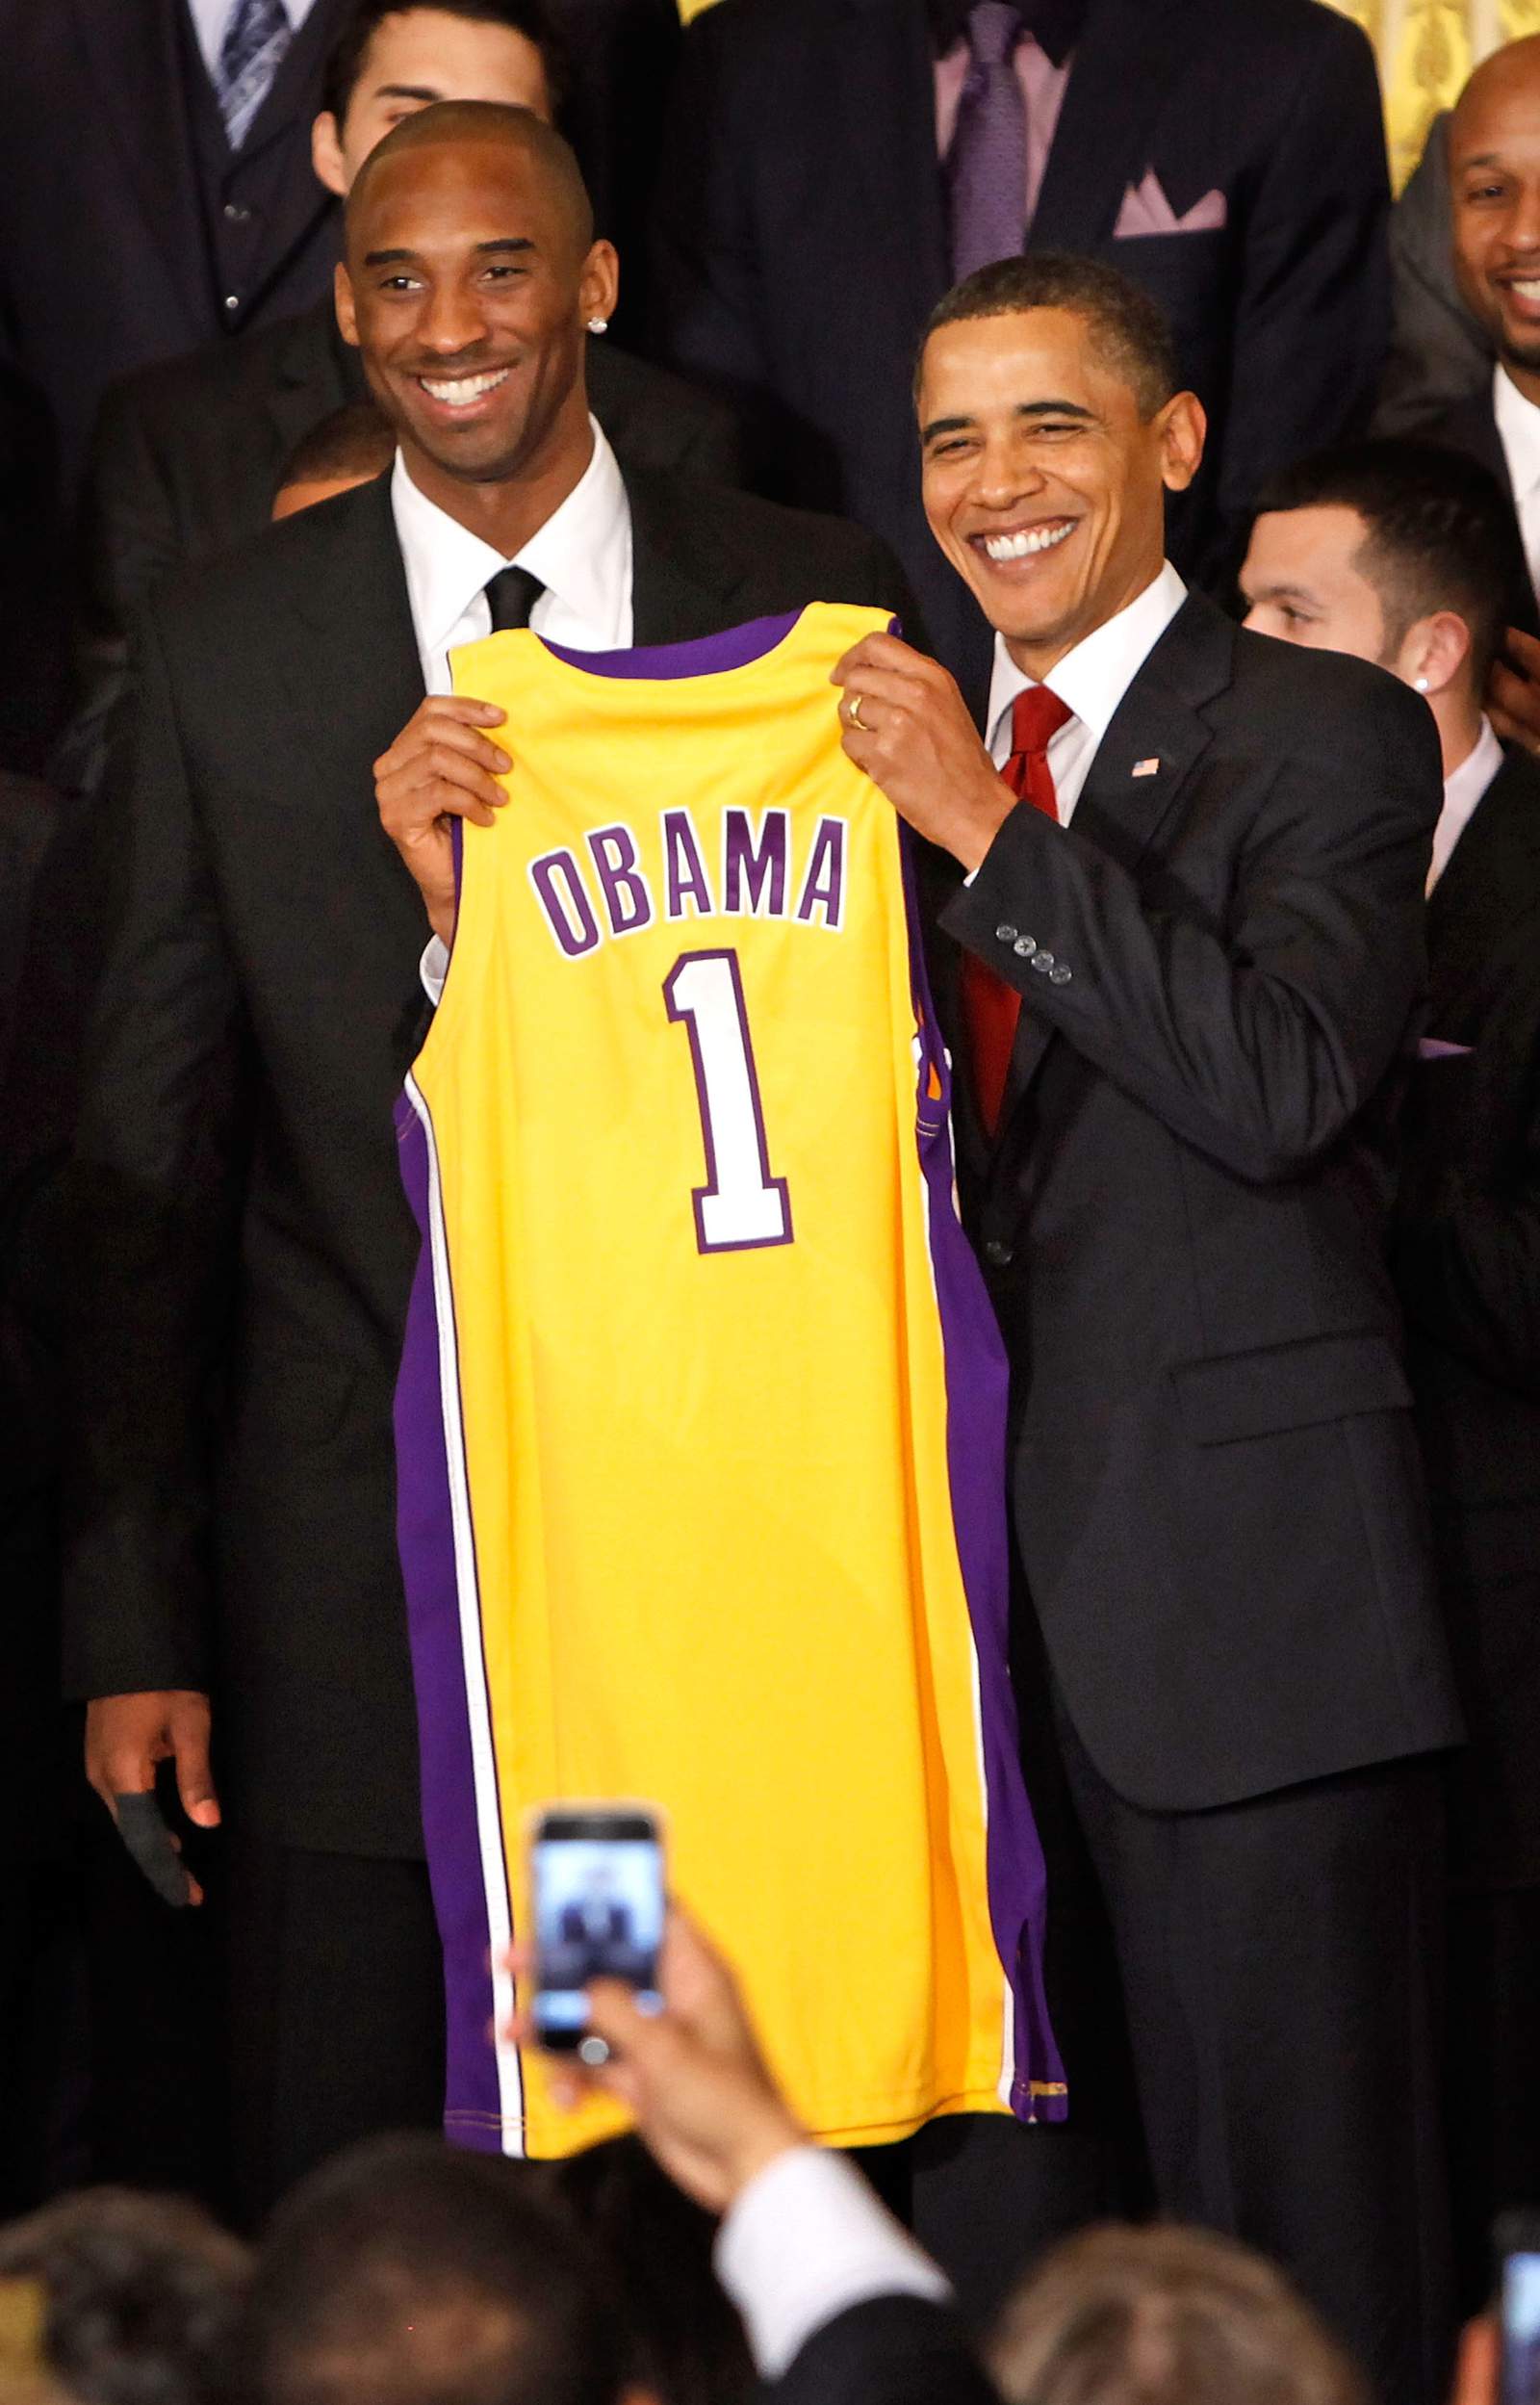 Then-President Barack Obama, at right, poses for photos with Kobe Bryant and members of the NBA 2009 champion Los Angeles Lakers -- this was taken in the East Room of the White House on Jan. 25, 2010.